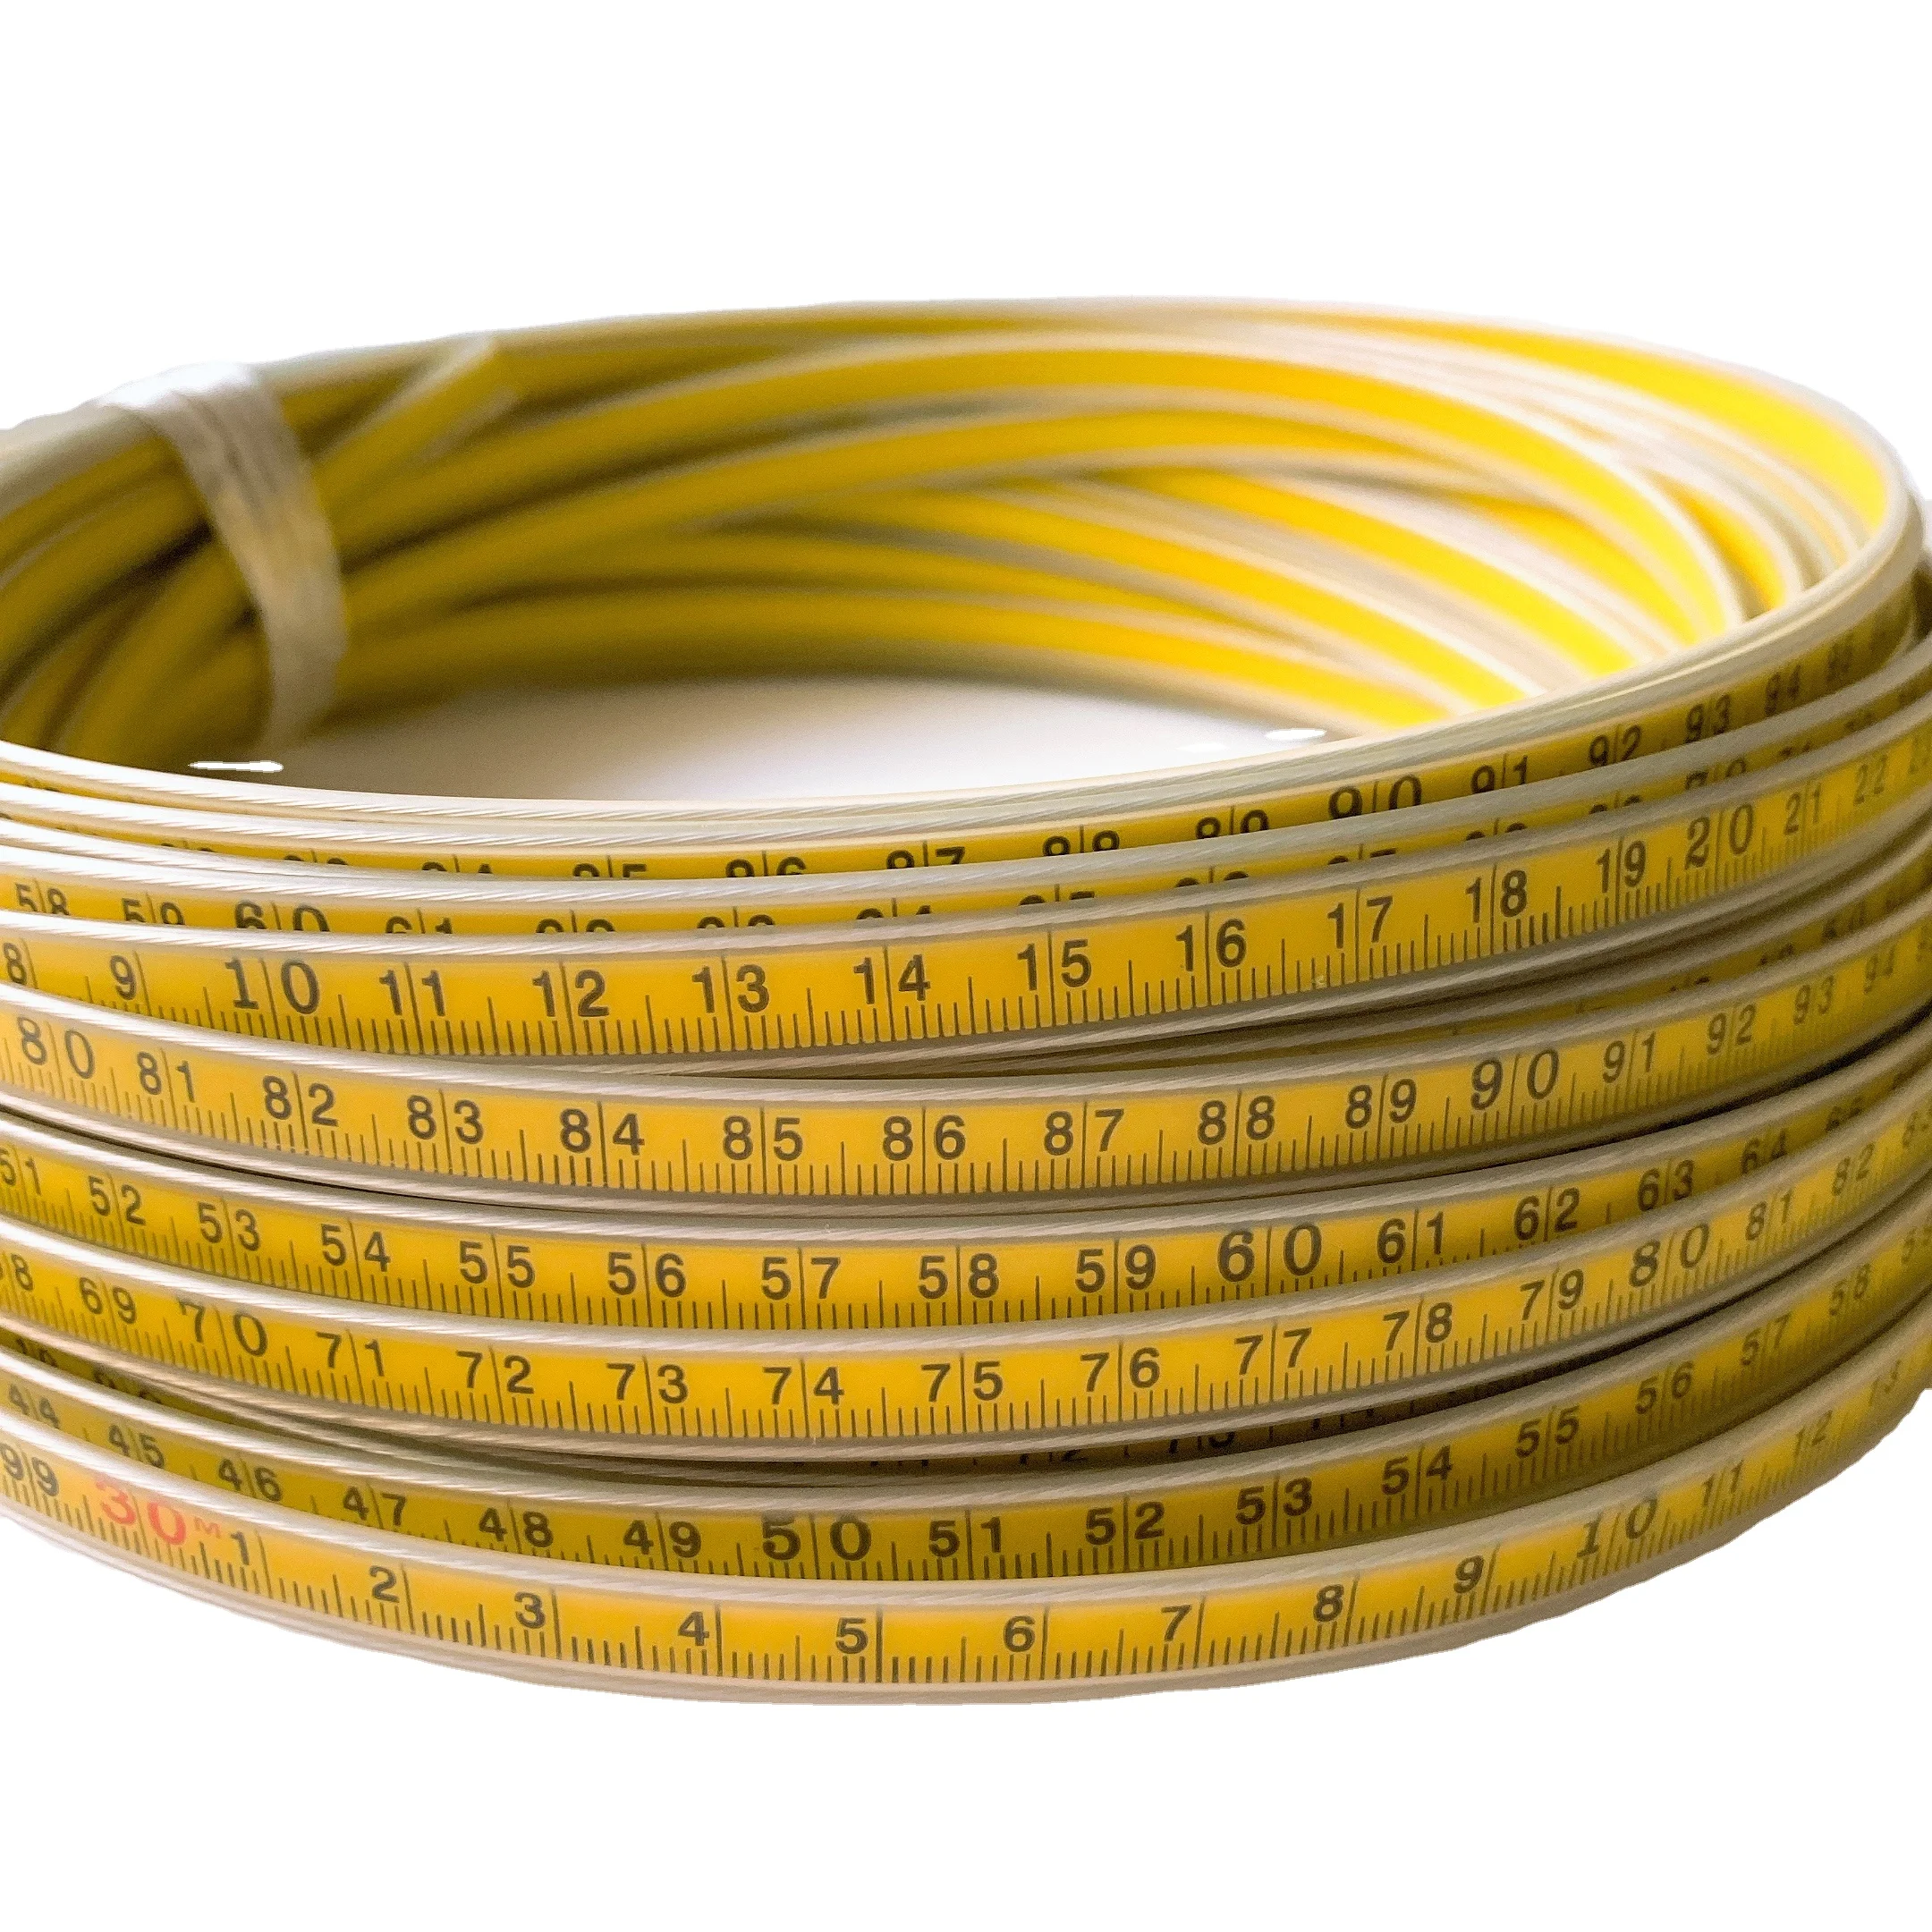 Oil Strip cable. Steel tape cable (1600500030763)